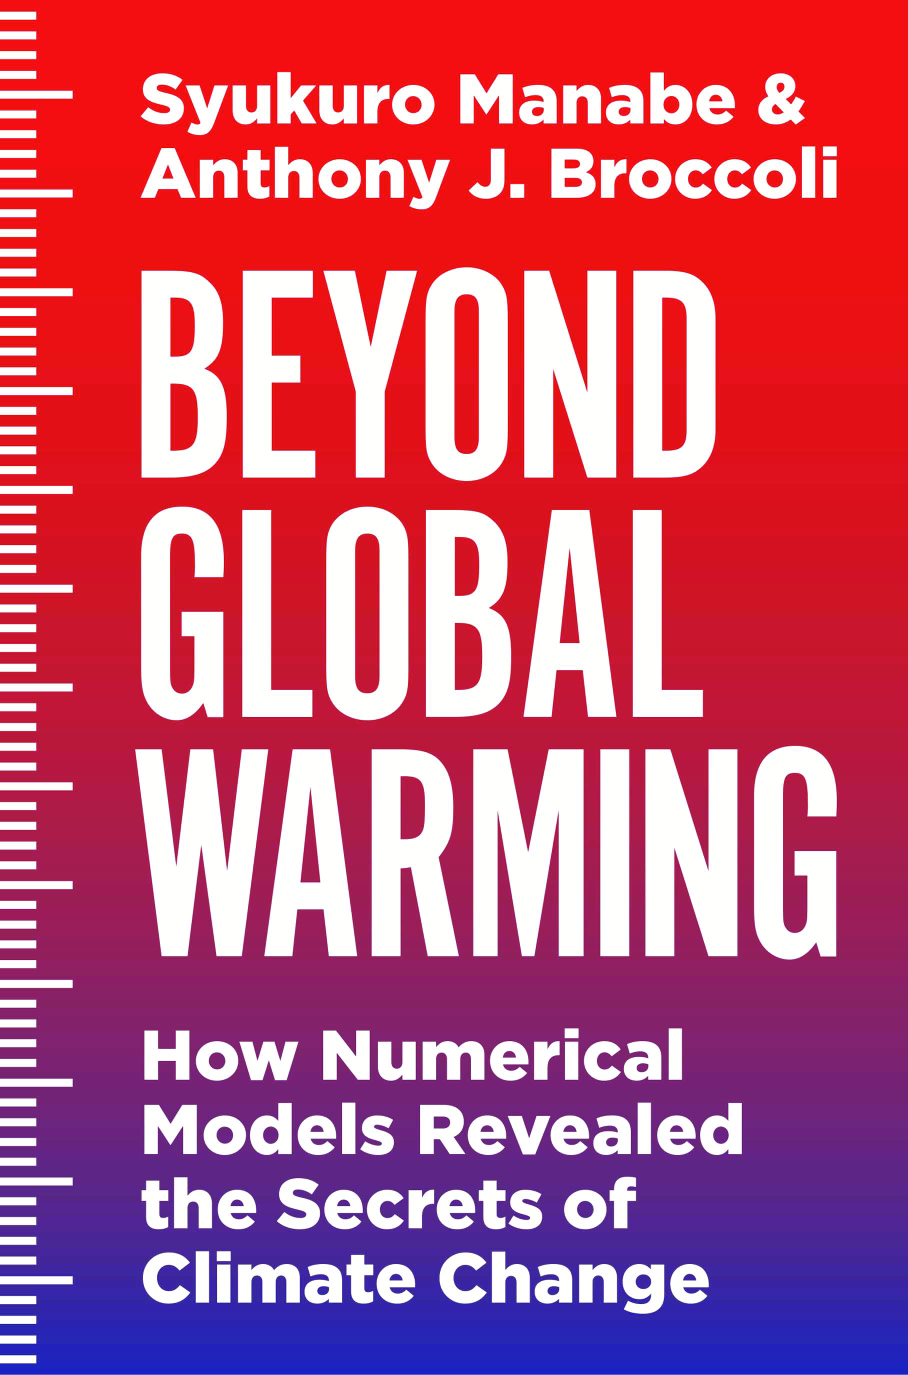 Beyond global warming : how numerical models revealed the secrets of climate change